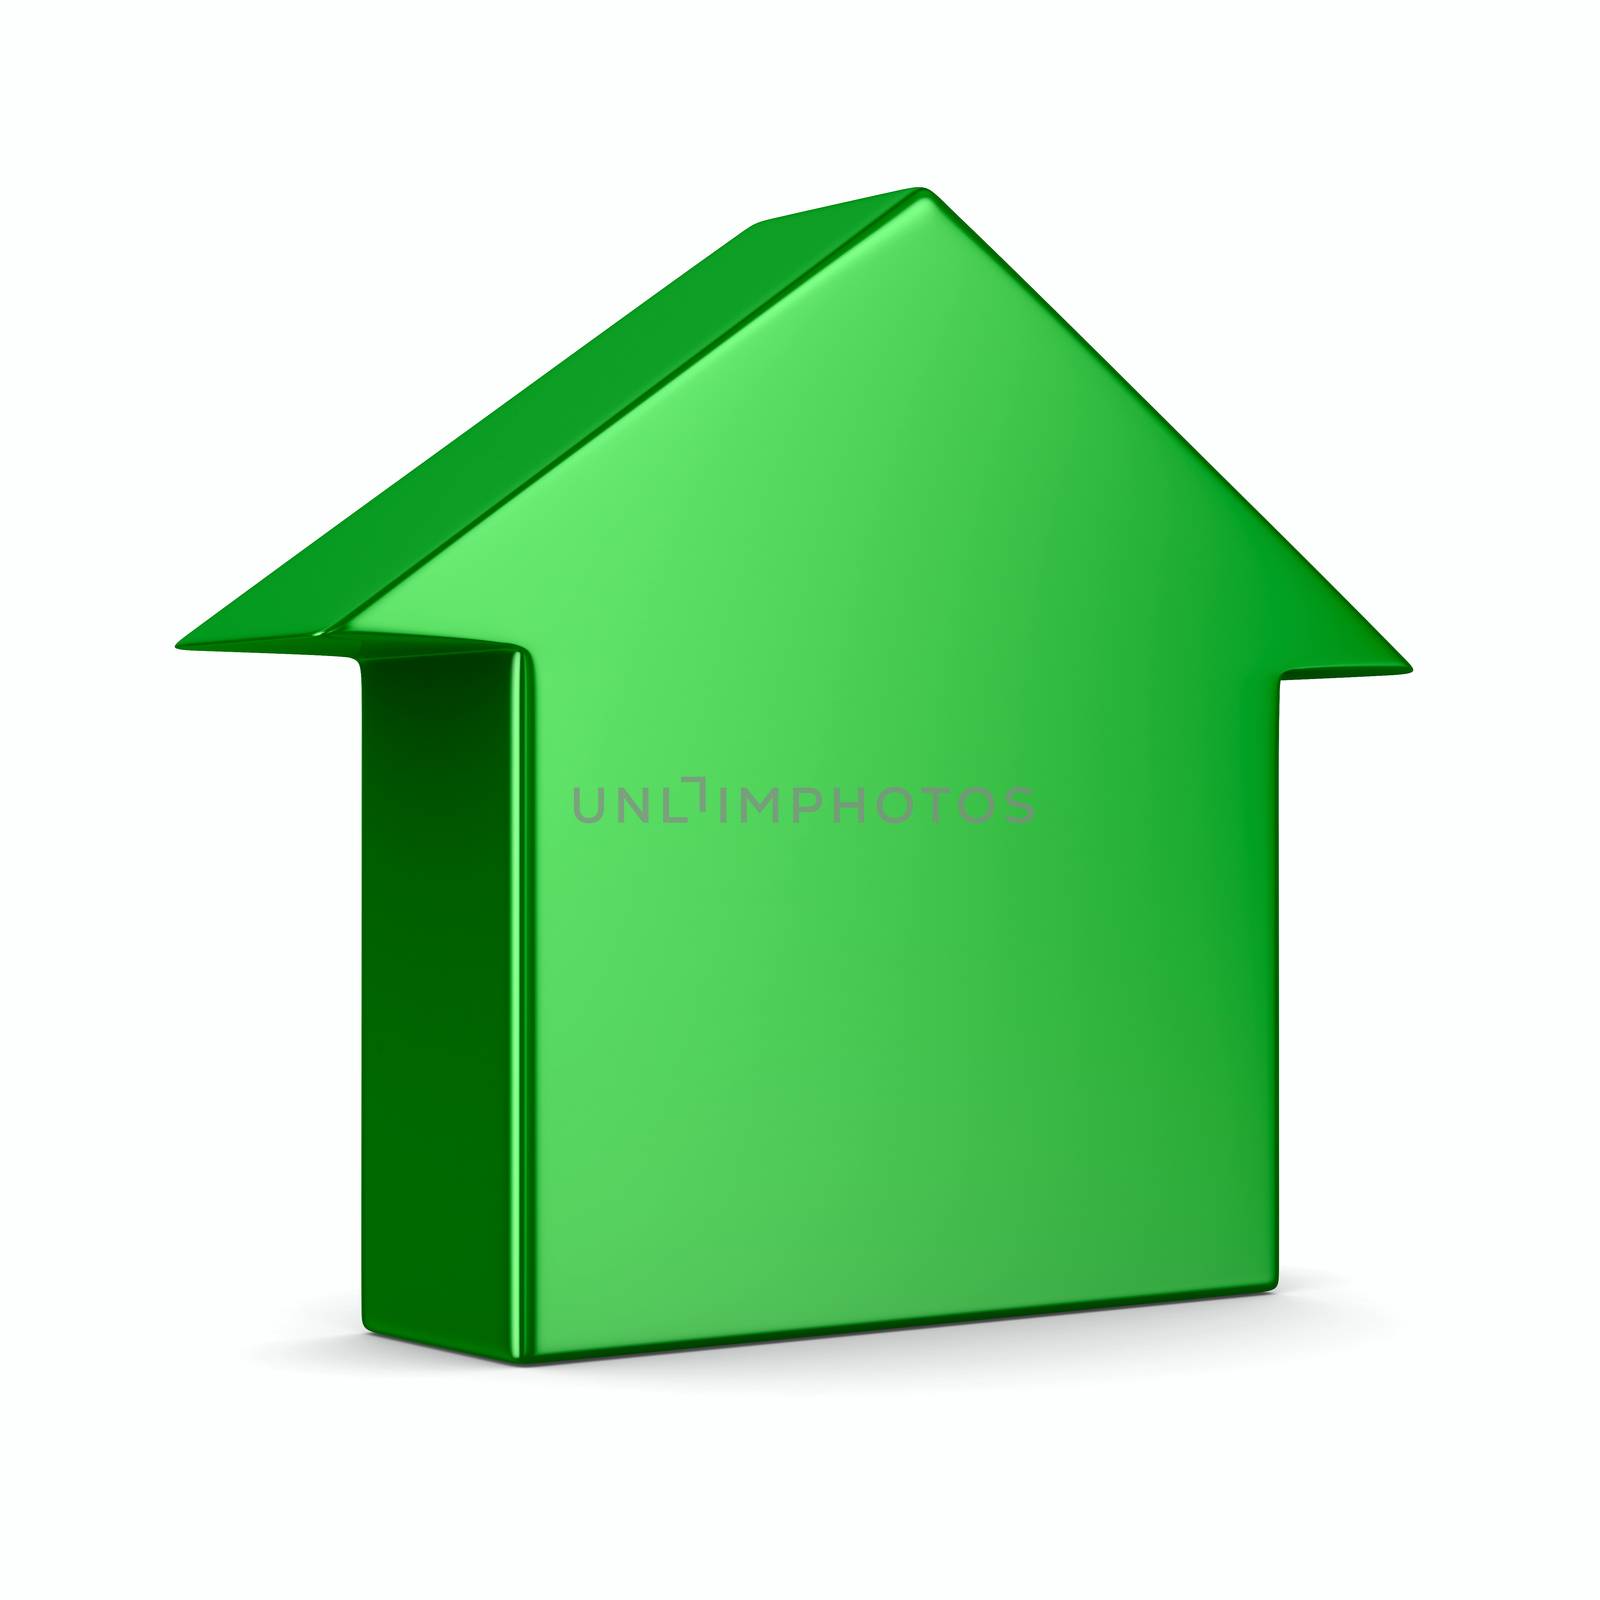 Green house on white background. Isolated 3D image